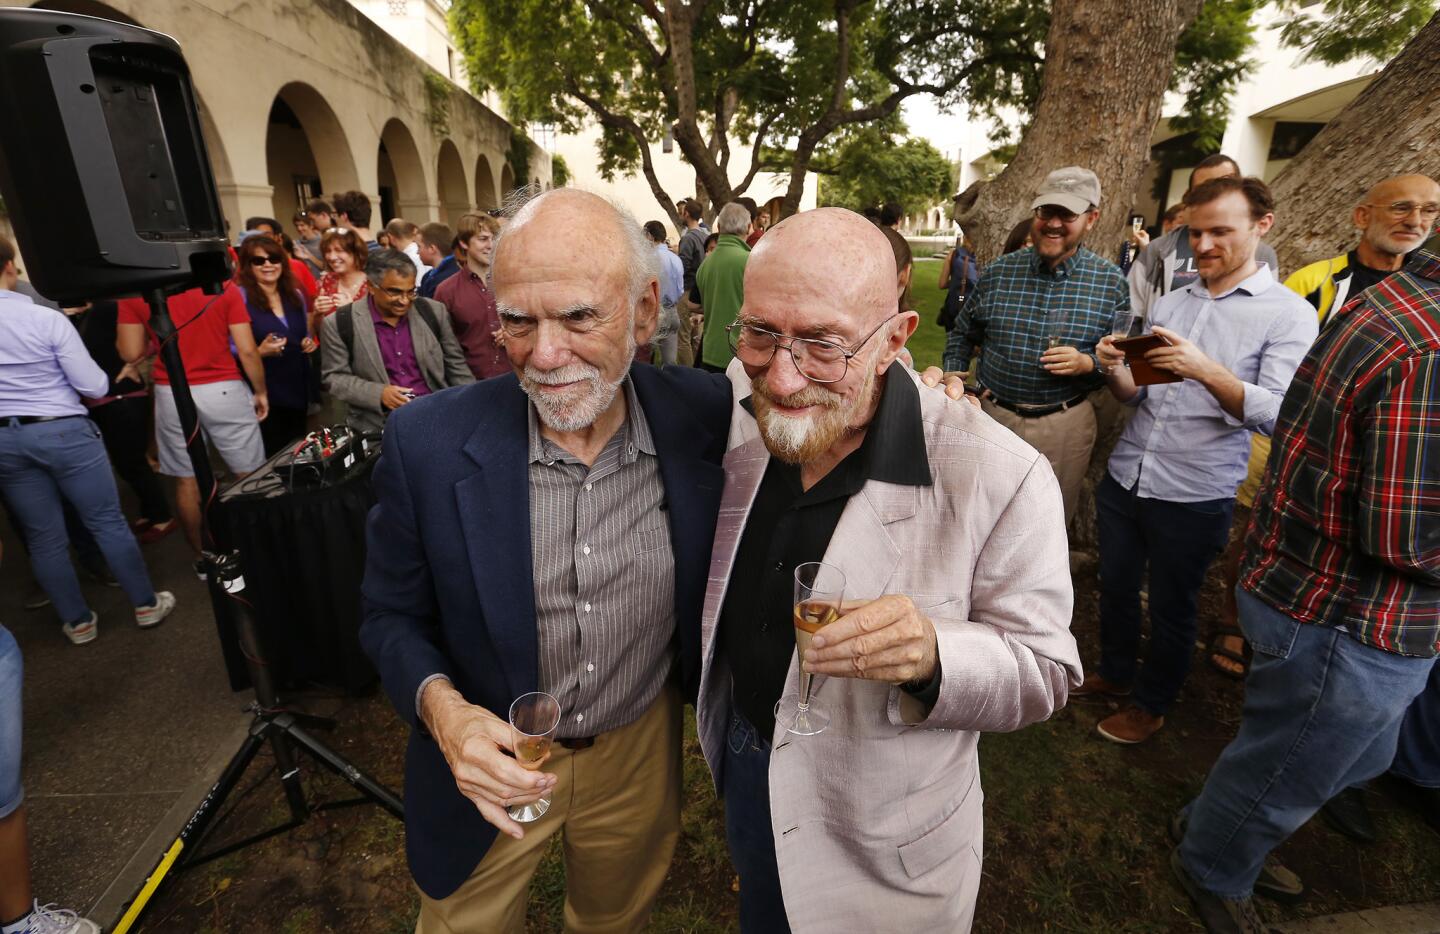 Caltech physicists Barry Barish, left, and Kip Thorne celebrate their Nobel Prize in physics for the LIGO experiment at a party at the Pasadena university.